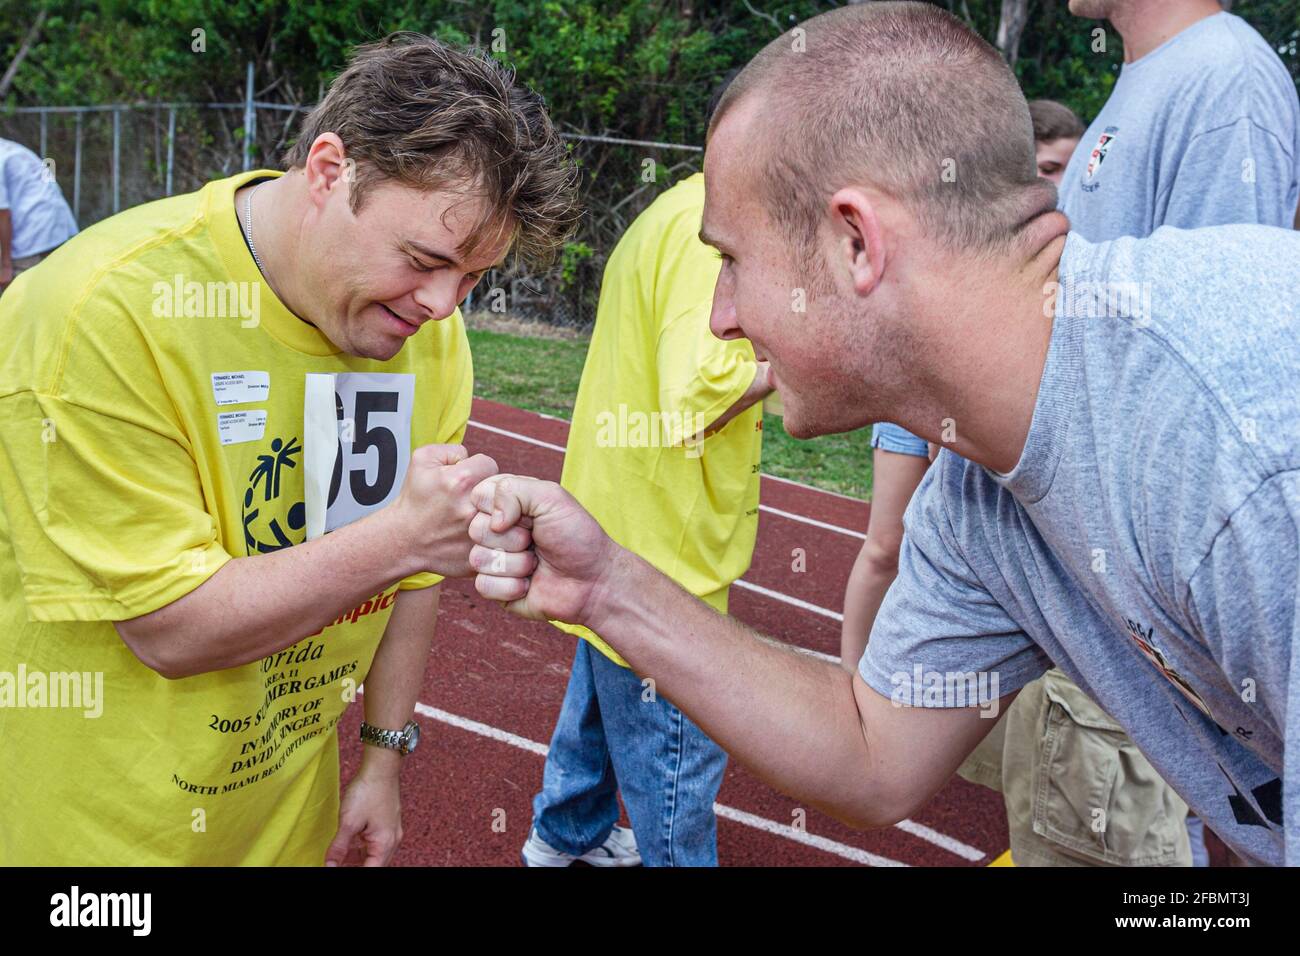 Florida North Miami FIU campus Special Olympics Summer Games,mentally disabled adult volunteer coach man men male fist bump, Stock Photo